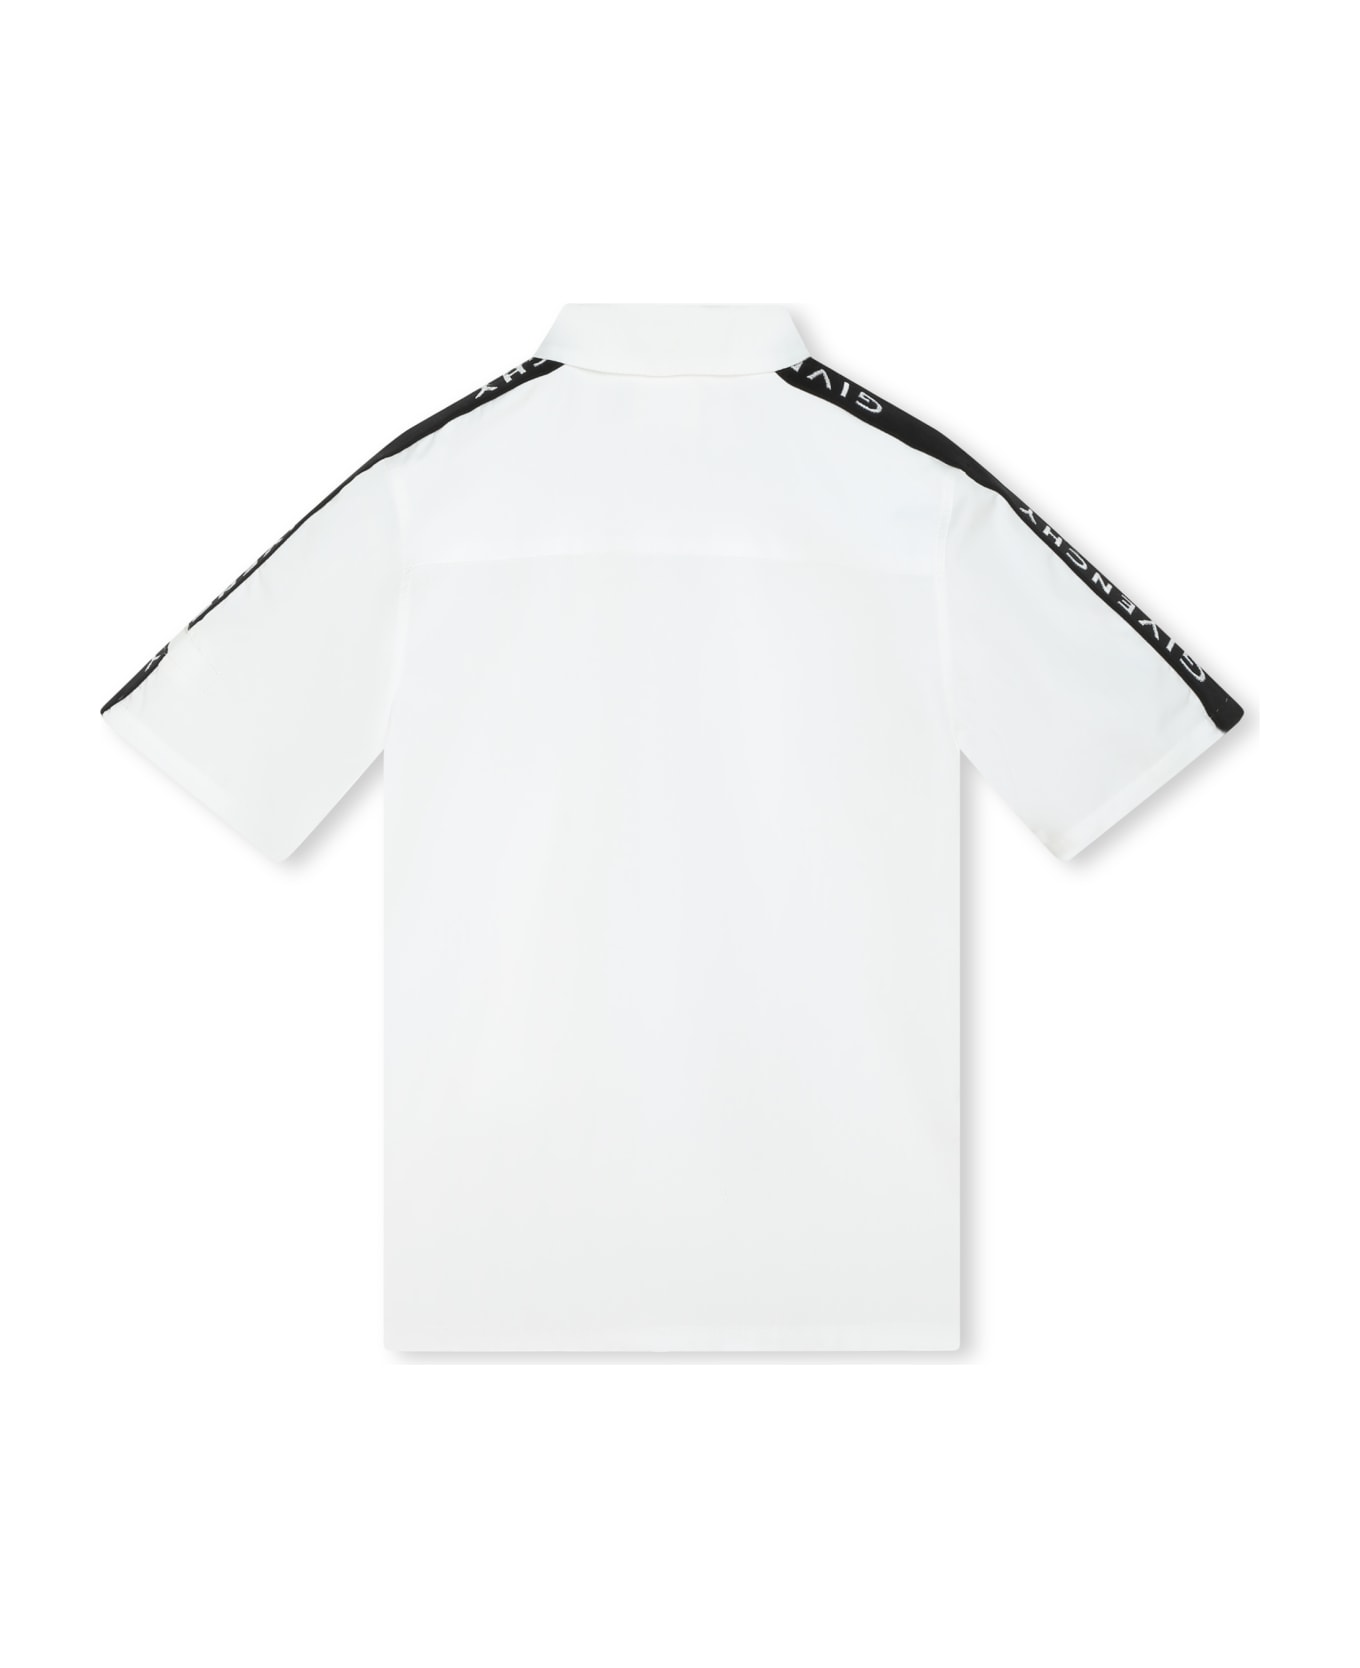 Givenchy Shirt With Print - White